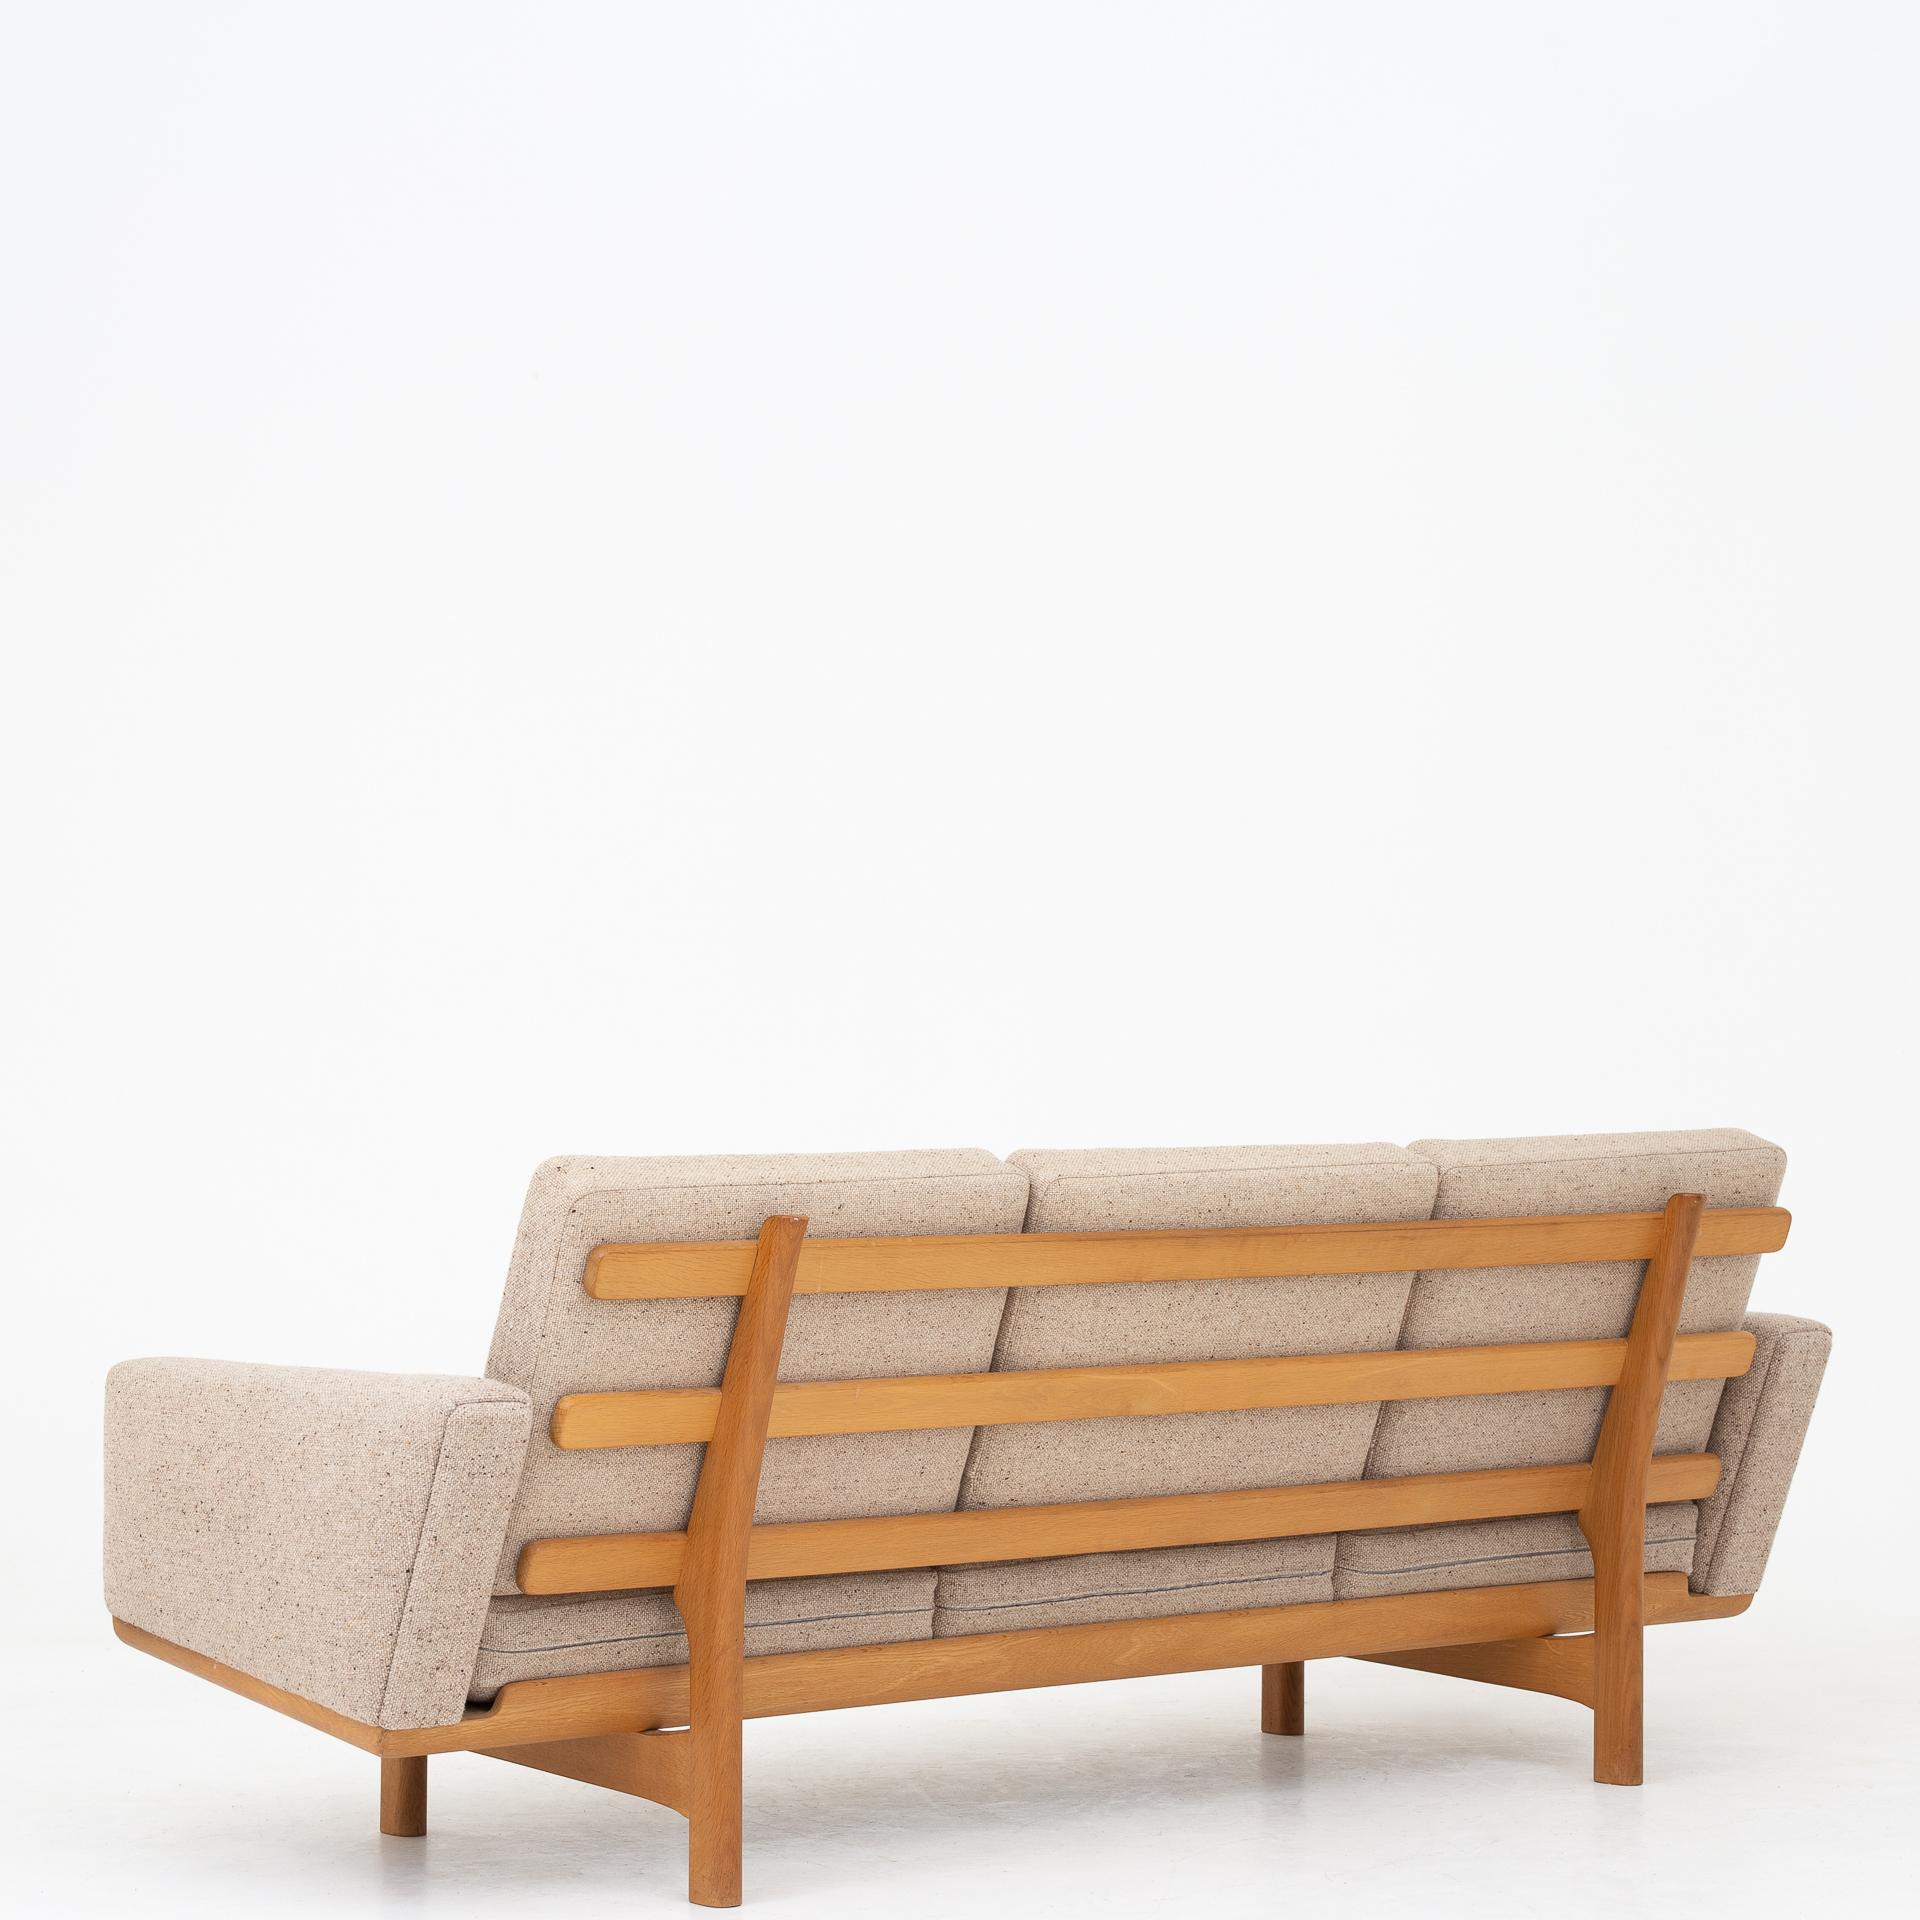 GE 236/3, 3-seat sofa in patinated oak and with cushions in light textile. Maker GETAMA.